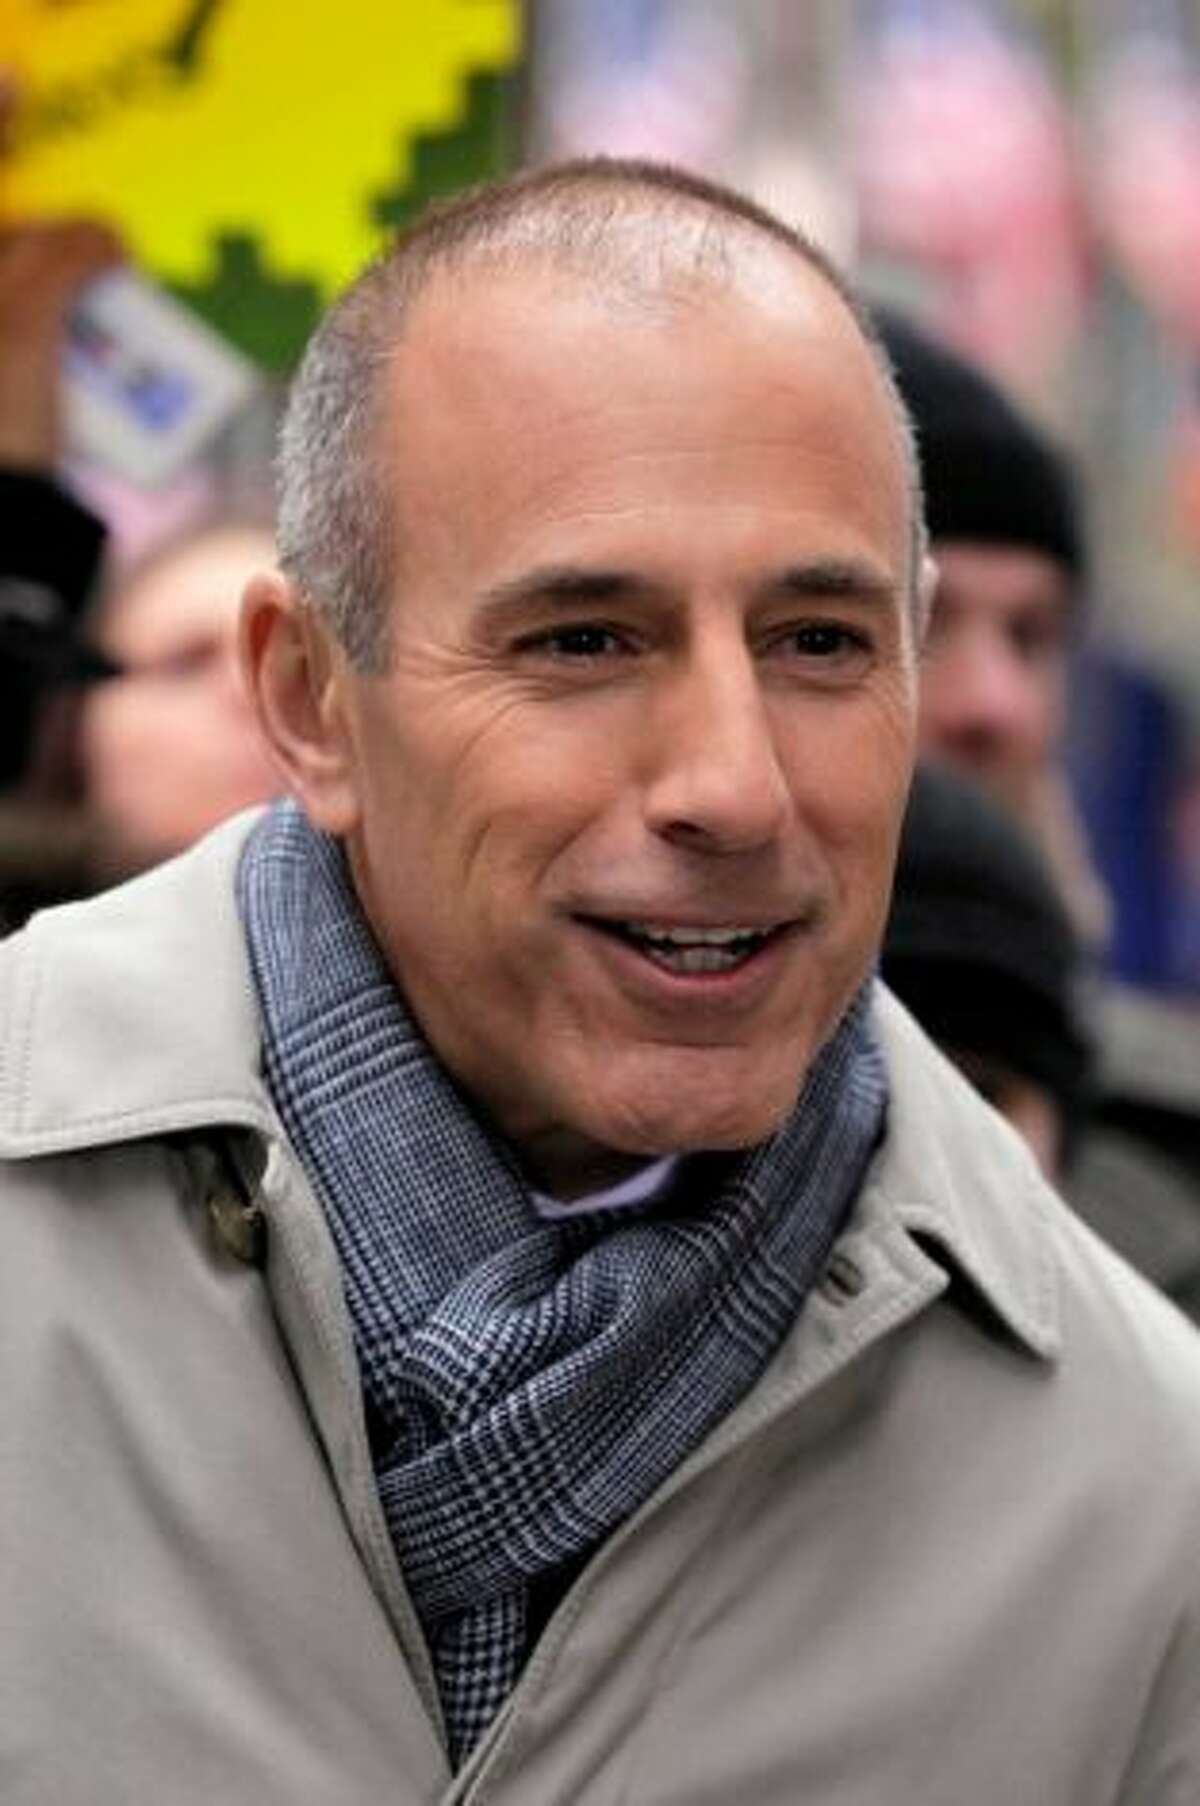 Matt Lauer, Today Show, was fired Wednesday after an allegation of sexual misconduct in the workplace.  ((AP Photo/Richard Drew, File) Photo: Richard Drew )